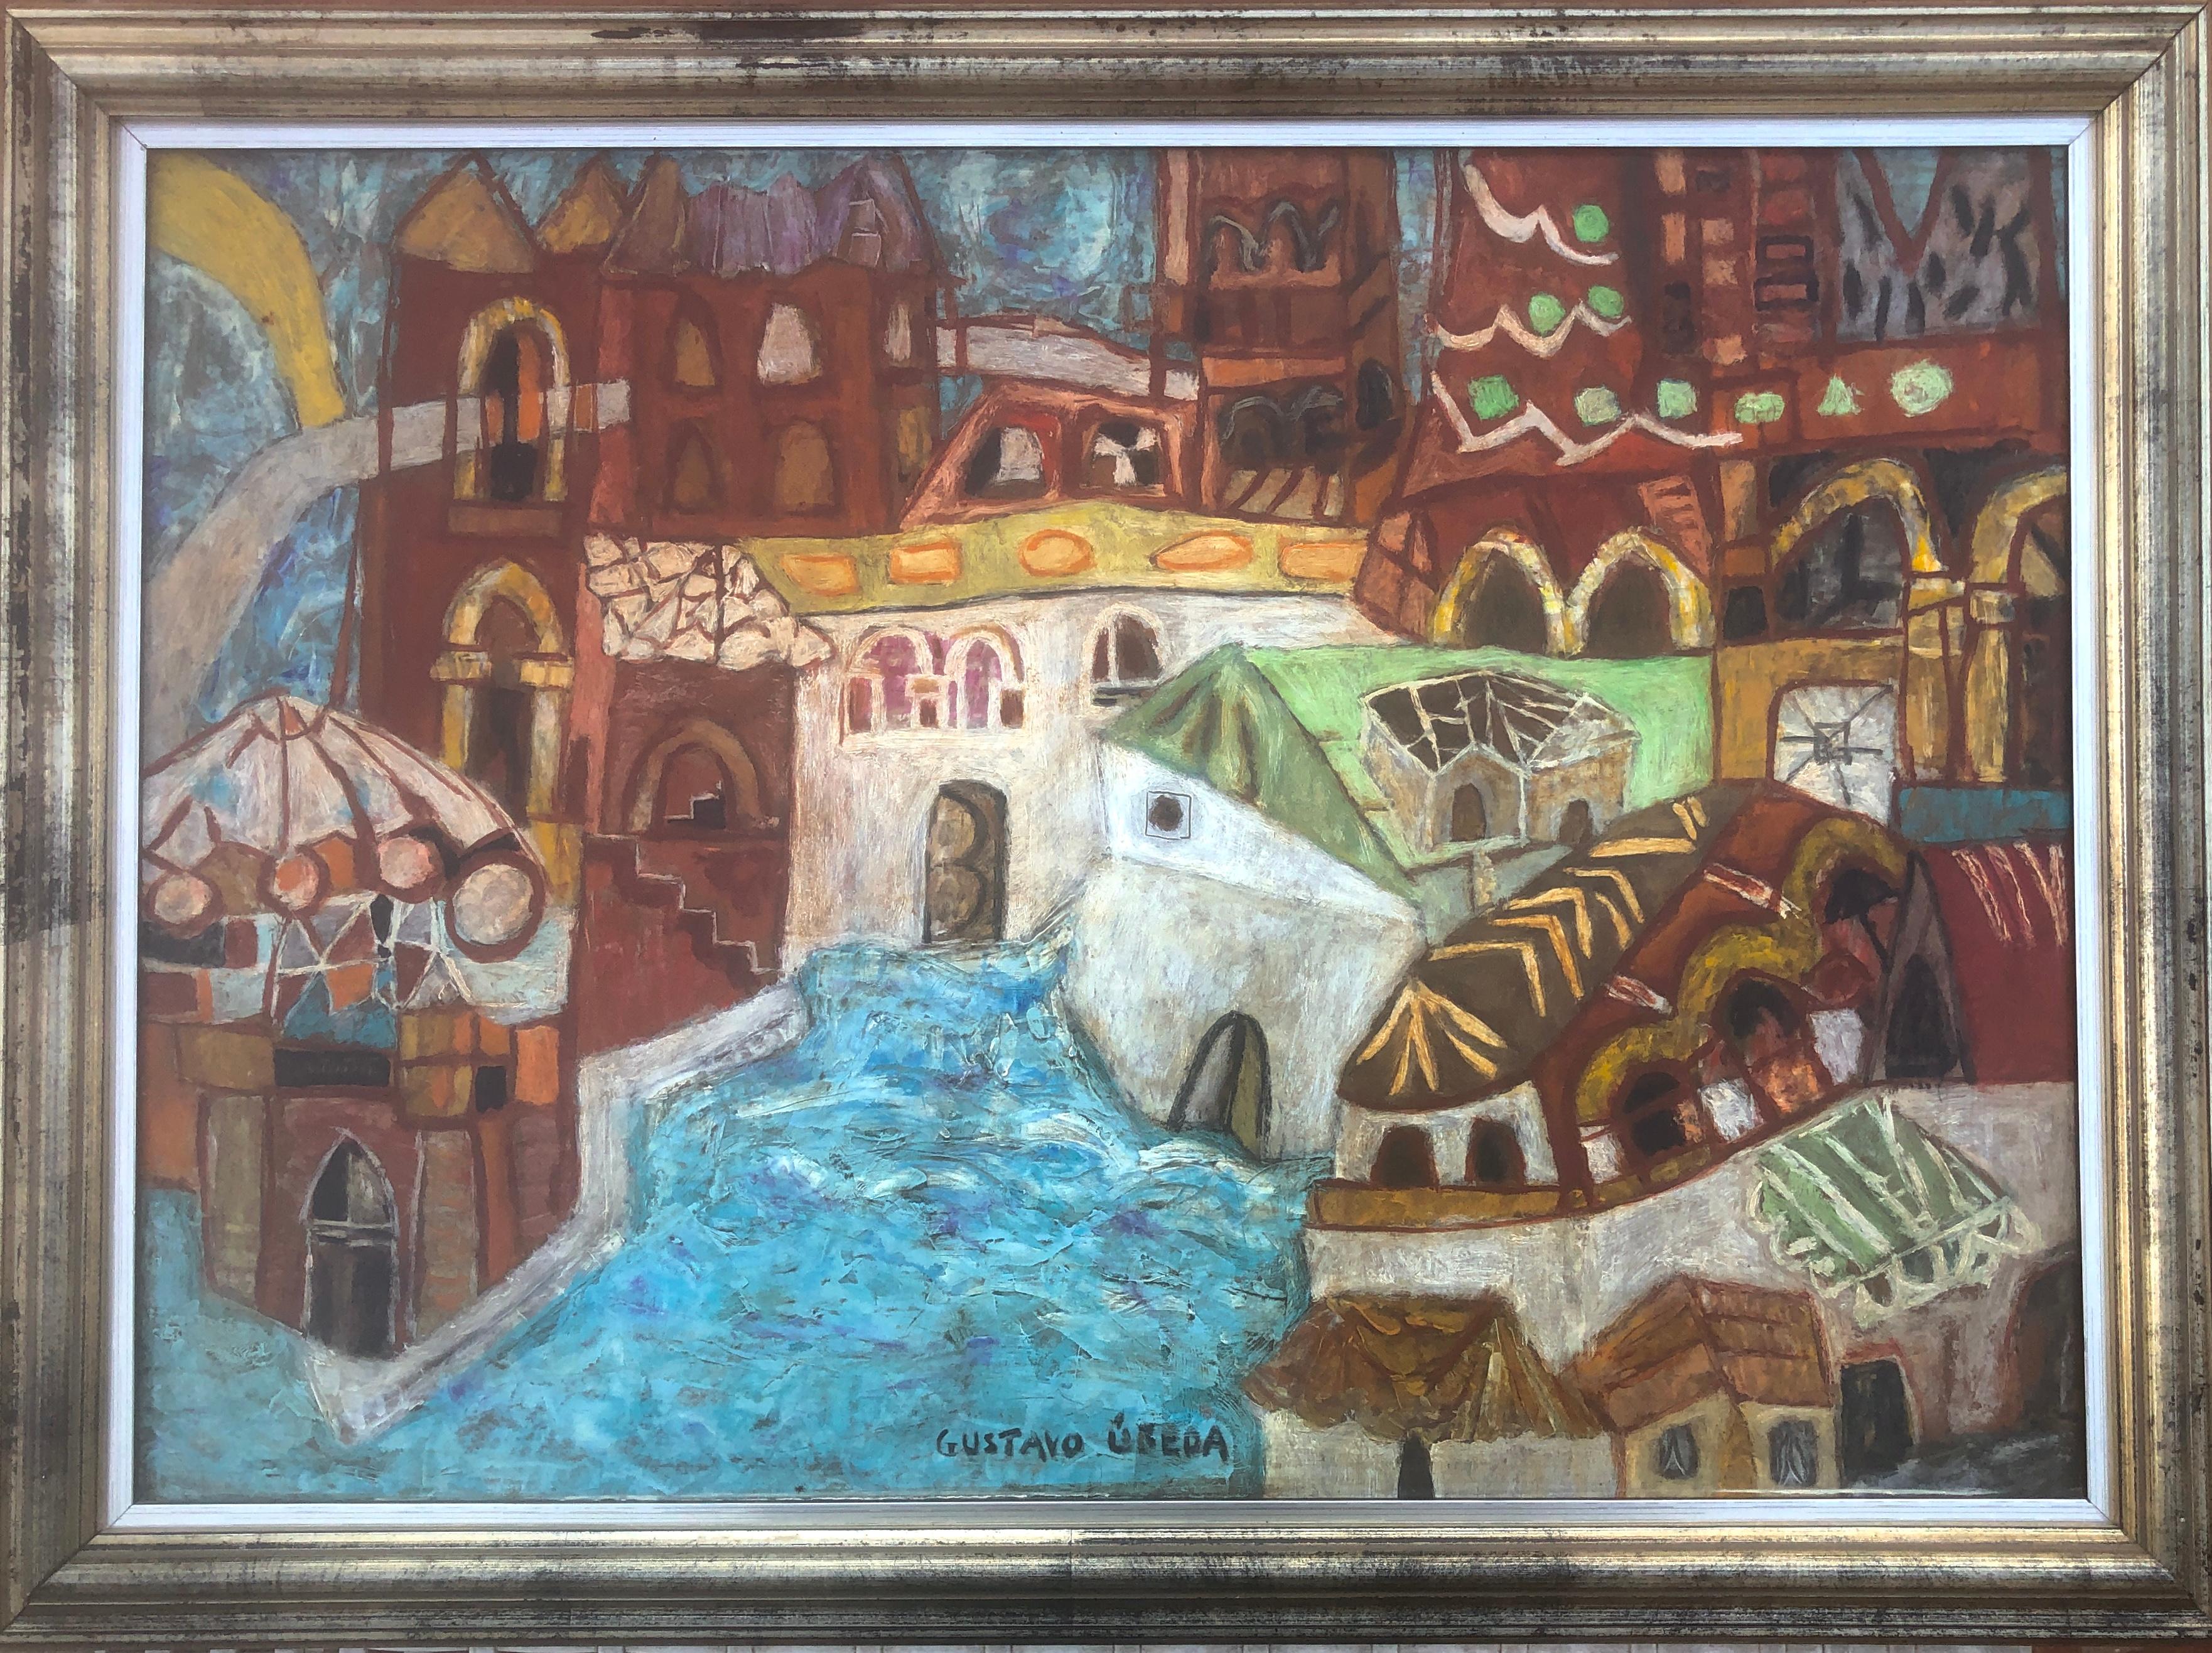 Rio de Janeiro oil on board painting cubist urbanscape Ubeda - Painting by Gustavo Ubeda